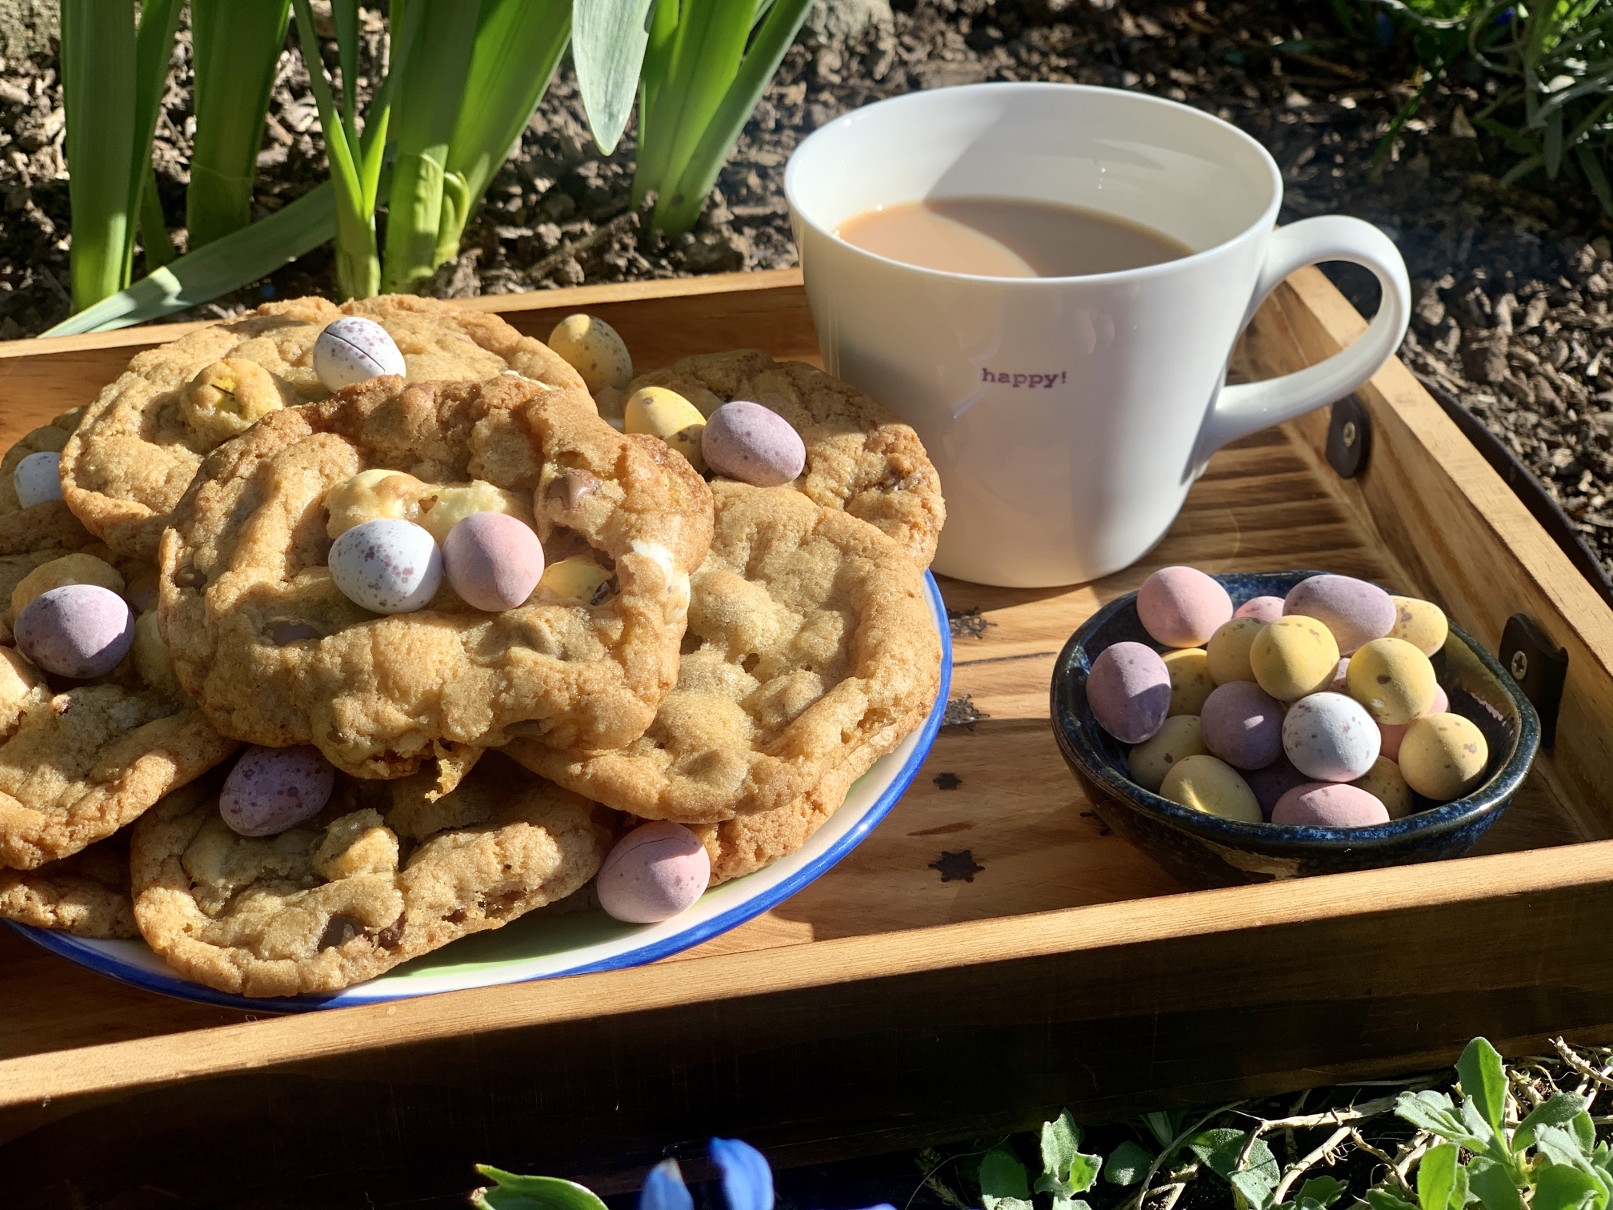 Delicious Easy Mini Egg and White Chocolate Cookies Recipe